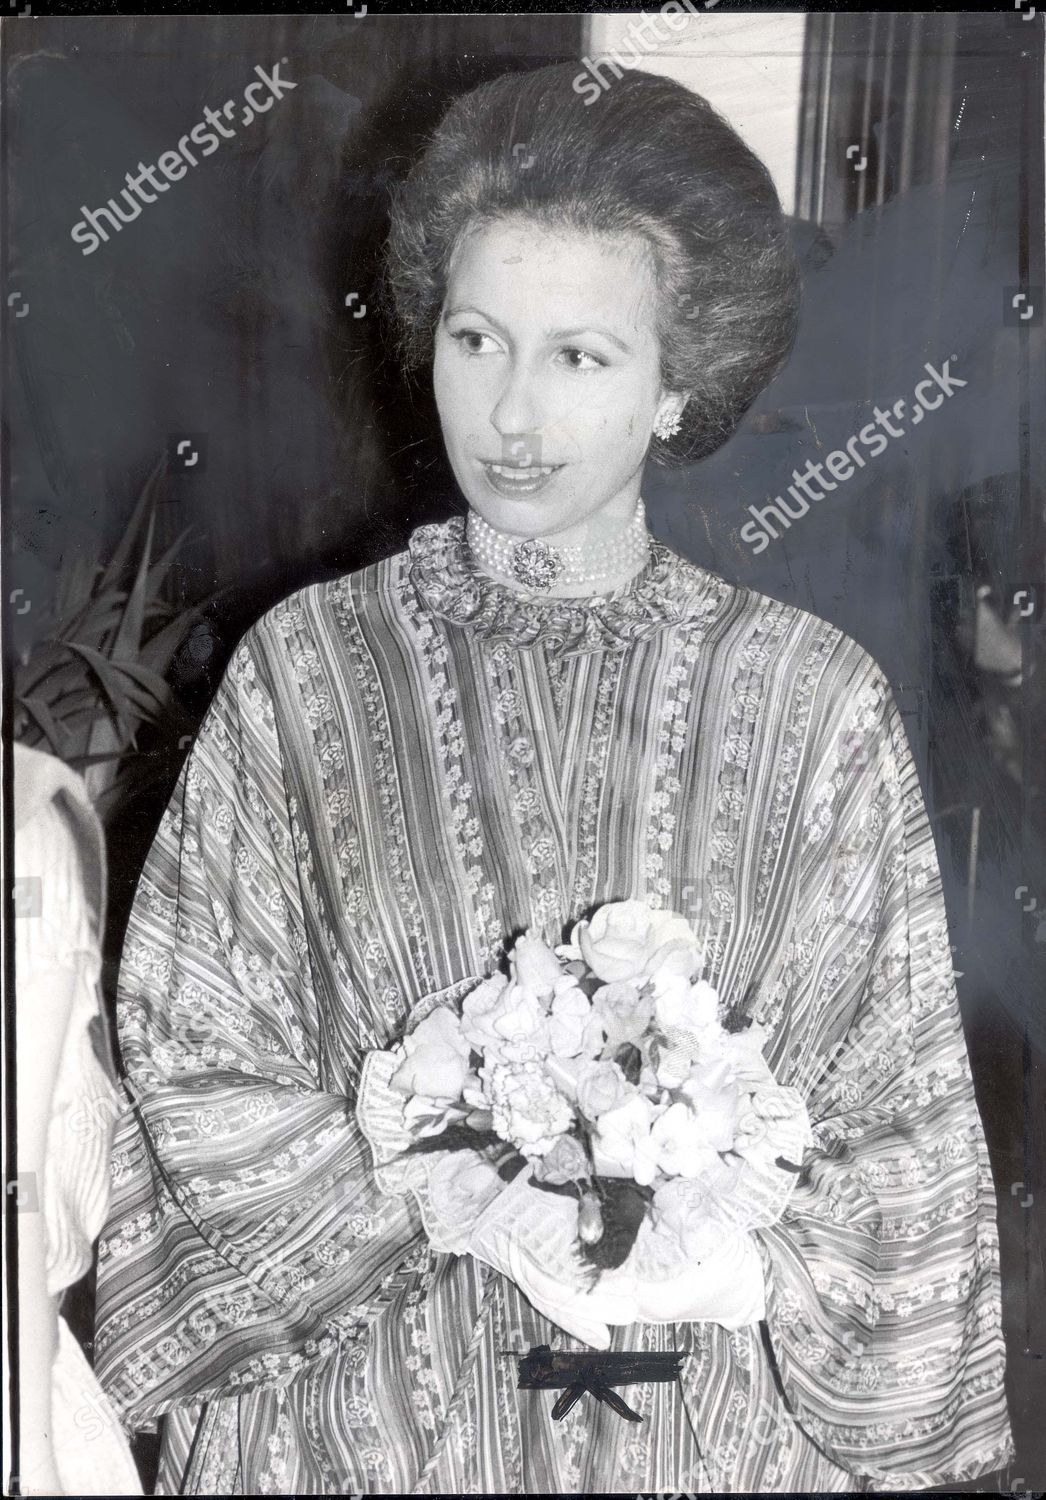 princess-anne-now-princess-royal-october-1978-princess-anne-at-charity-fashion-show-carlton-tower-hotel-with-her-fifth-wedding-anniversary-only-a-fortnight-away-princess-anne-was-in-sparkling-mood-last-night-at-a-charity-fashion-show-in-london-pri-shutterstock-editorial-890891a.jpg